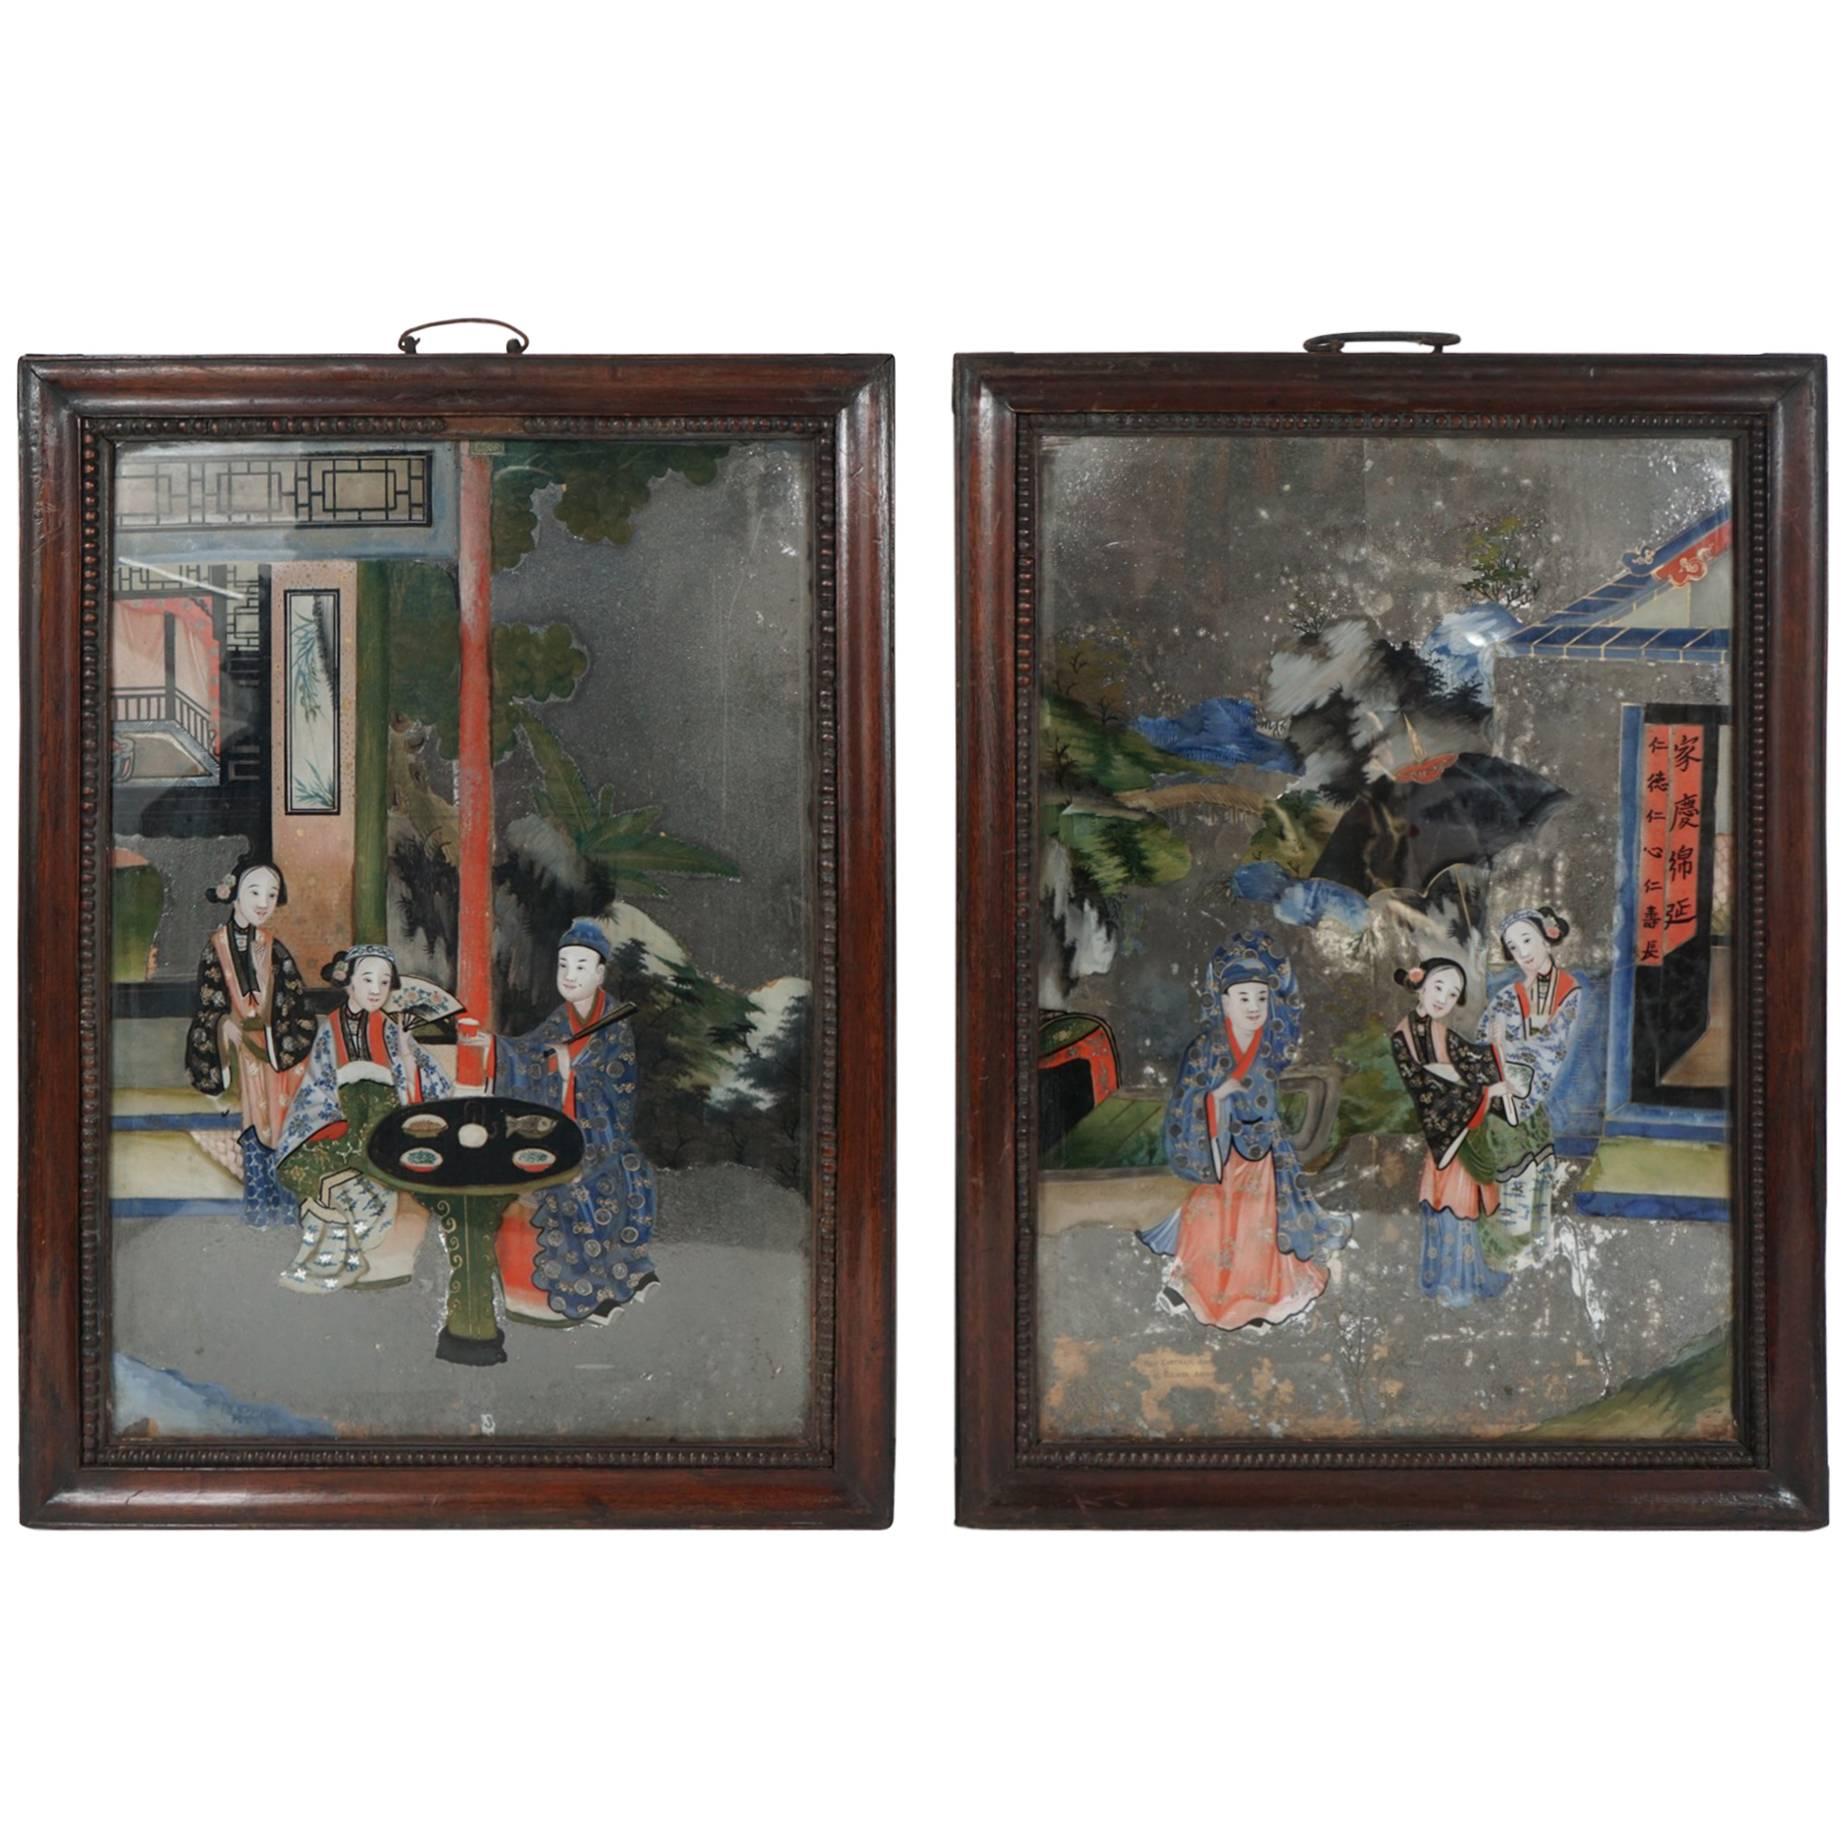 Set of Late 18th-Early 19th Century Chinese Reverse Paintings on Glass